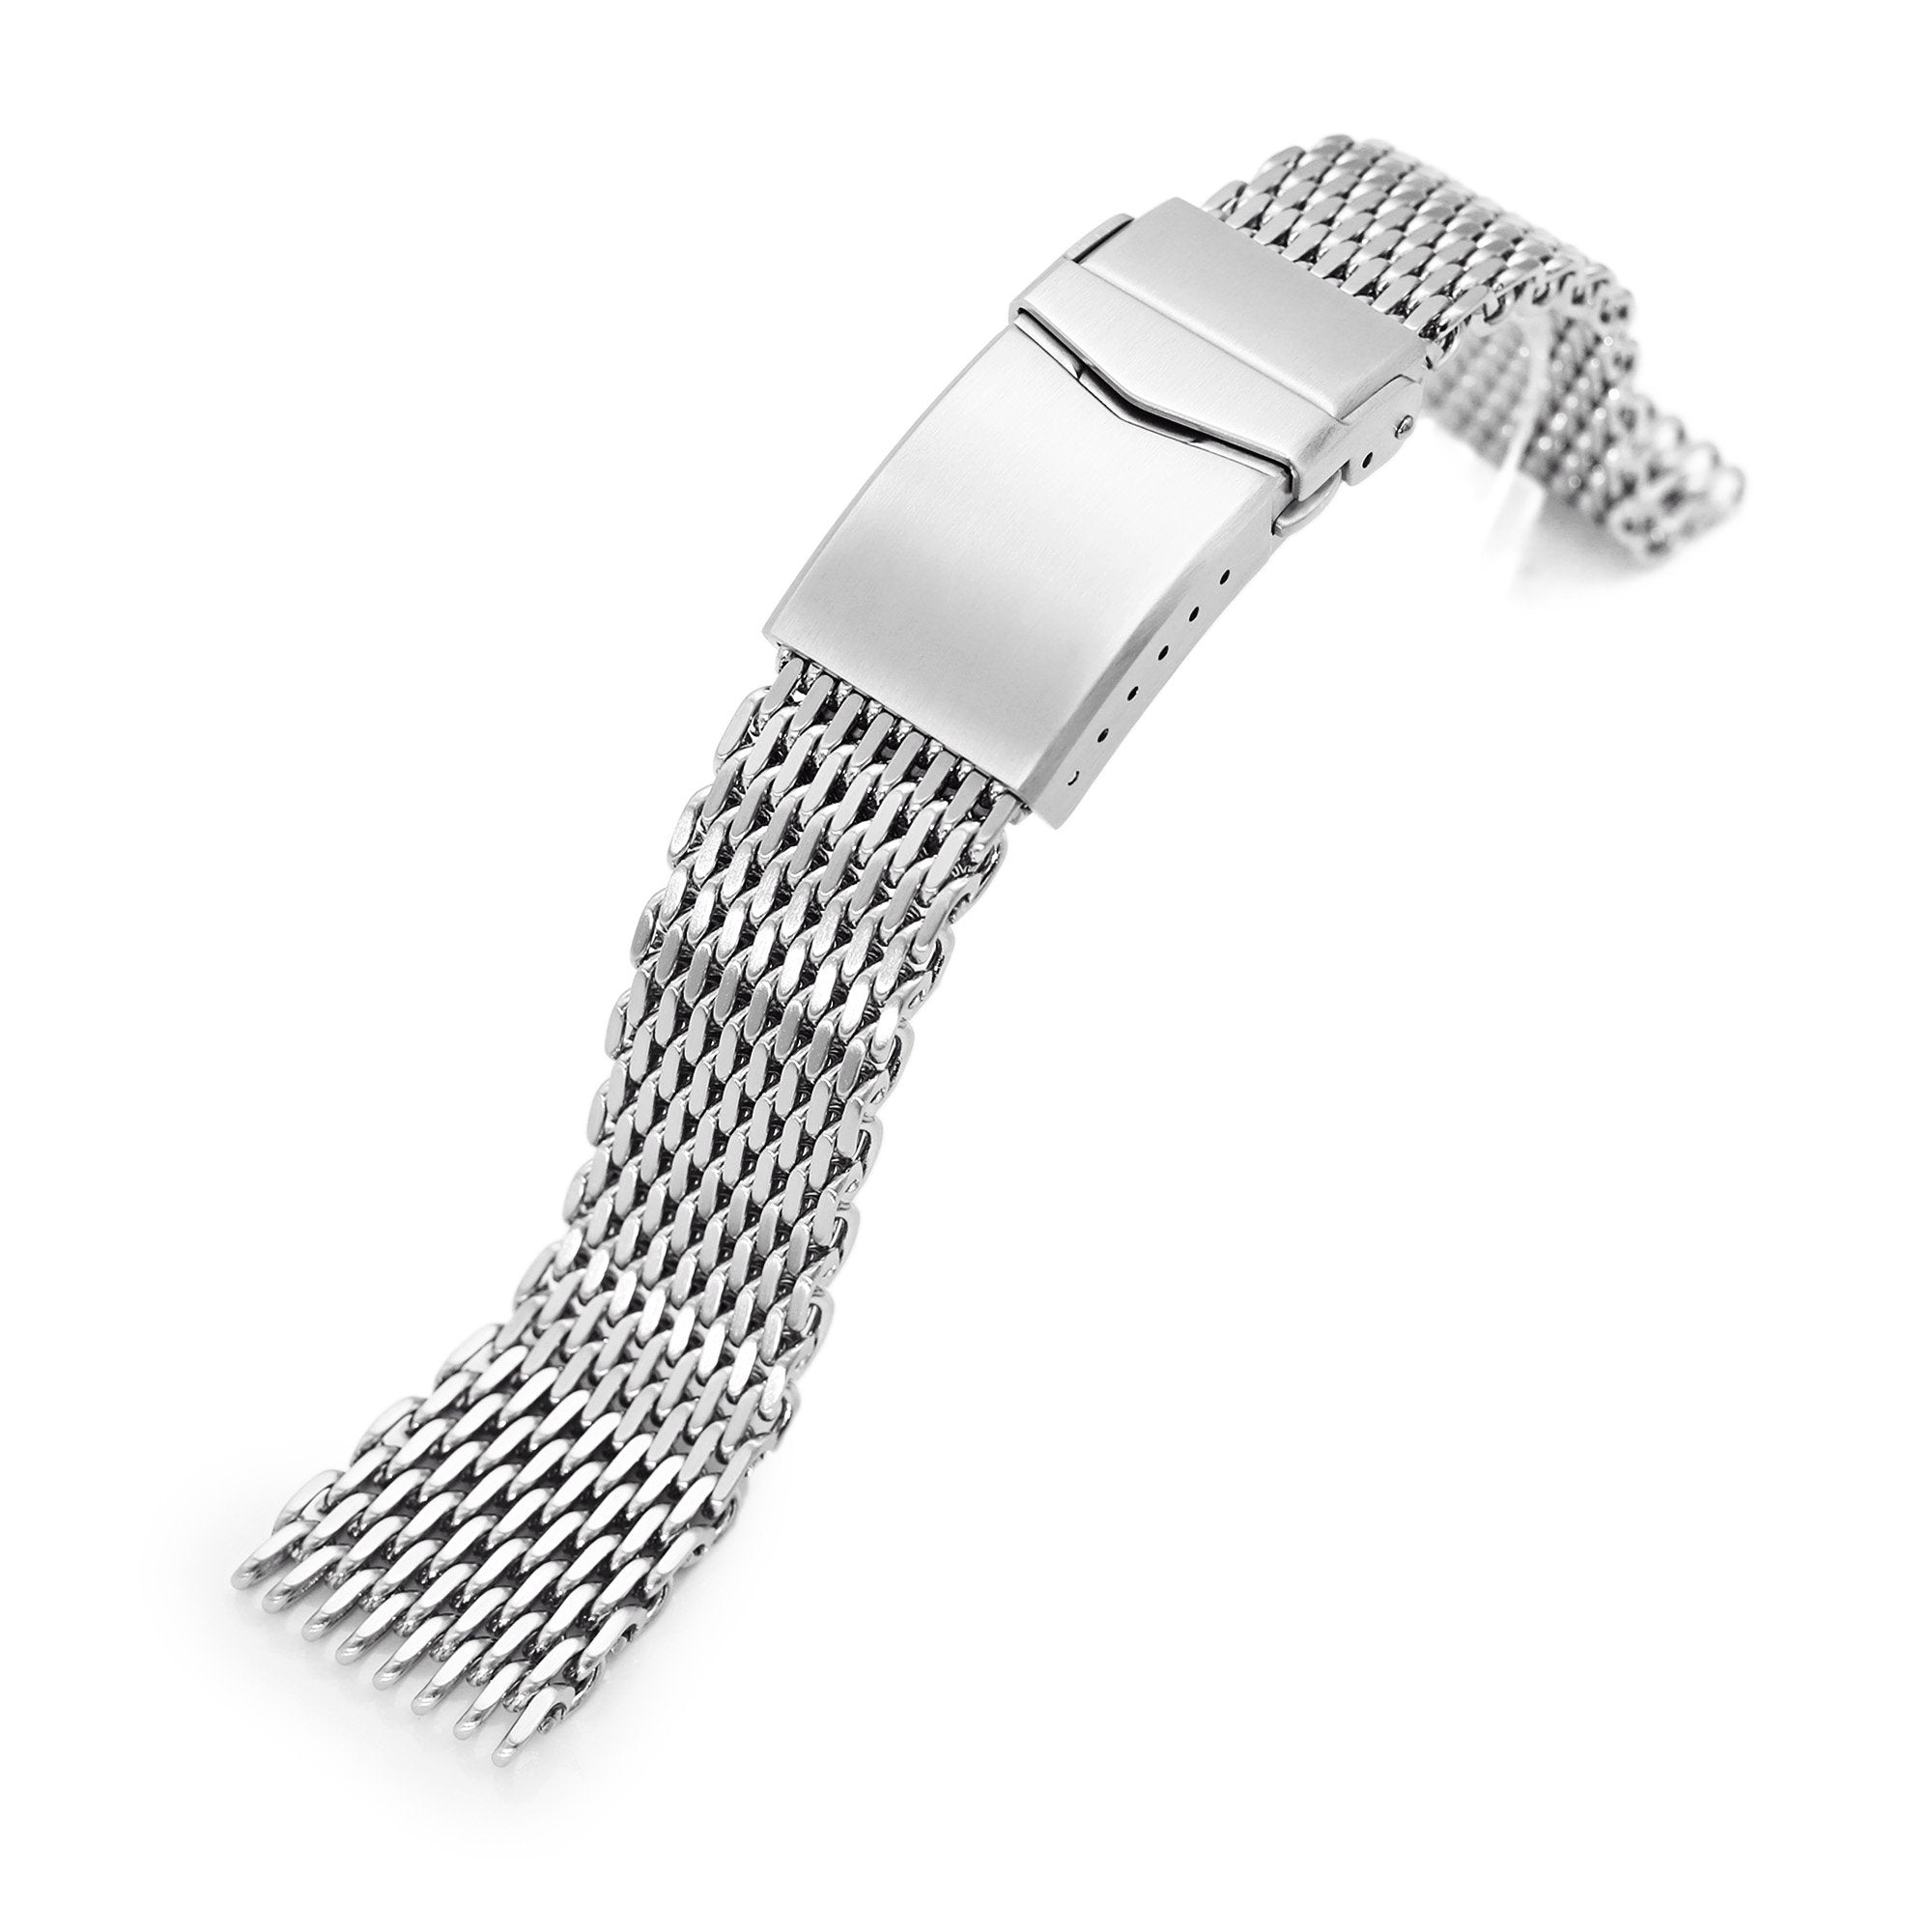 22mm Tapered "SHARK" Mesh Band Stainless Steel Watch Bracelet V-Clasp Brushed Strapcode Watch Bands